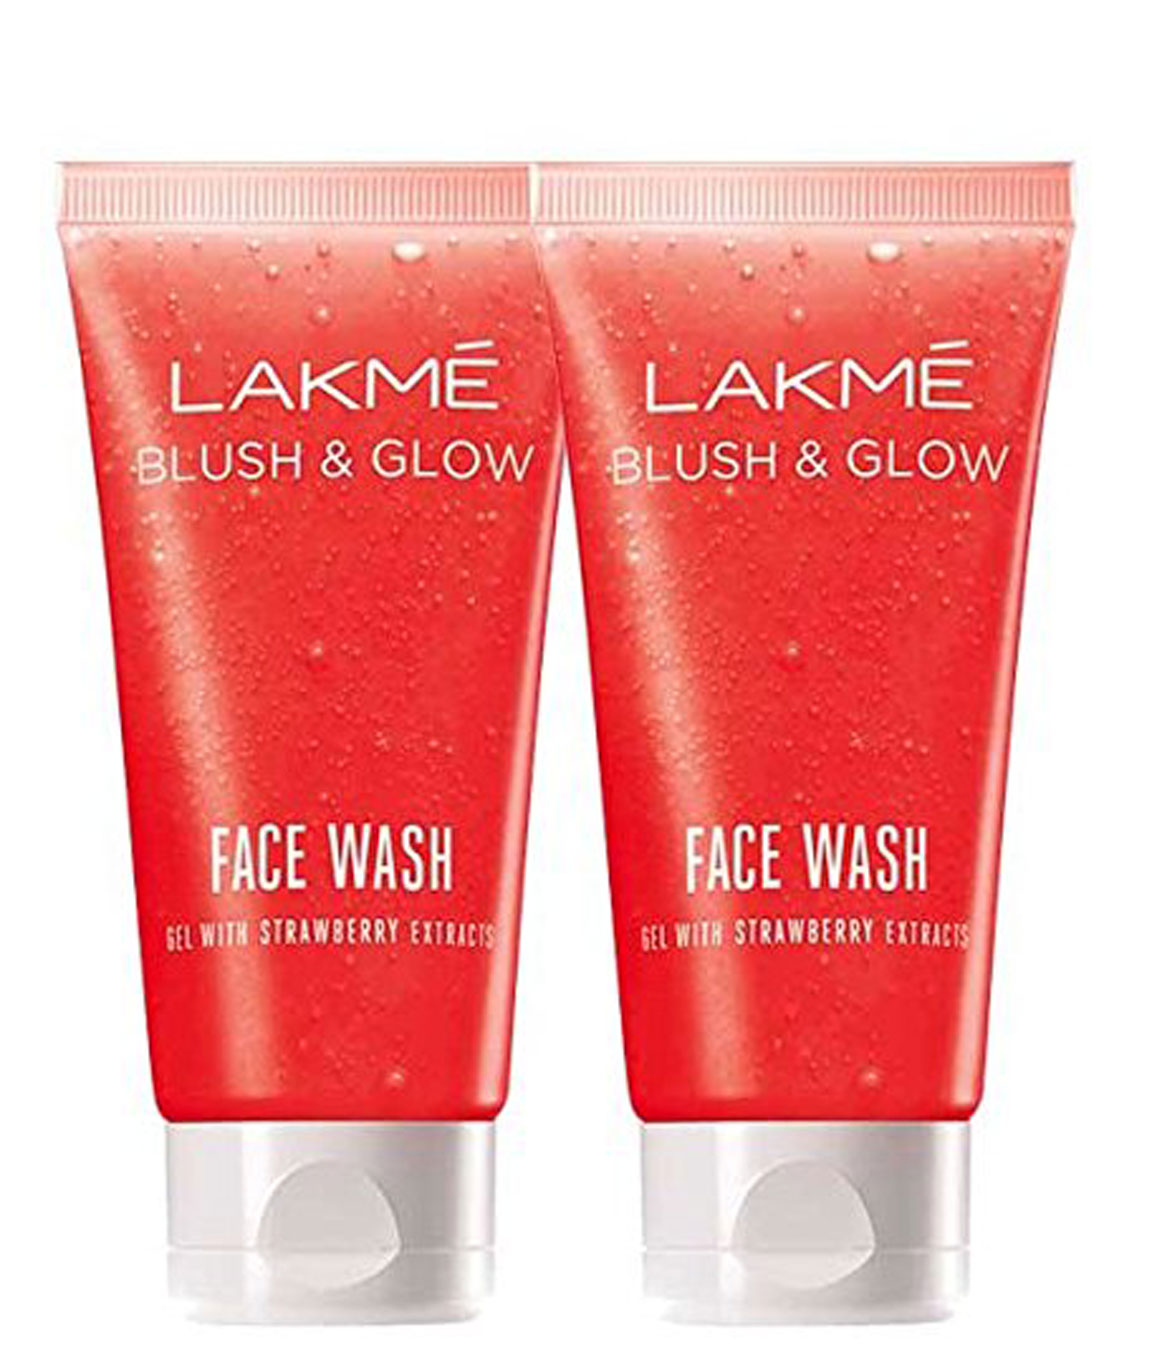 Lakme Clean Up Strawberry Face Wash 100gm (Pack of 2)